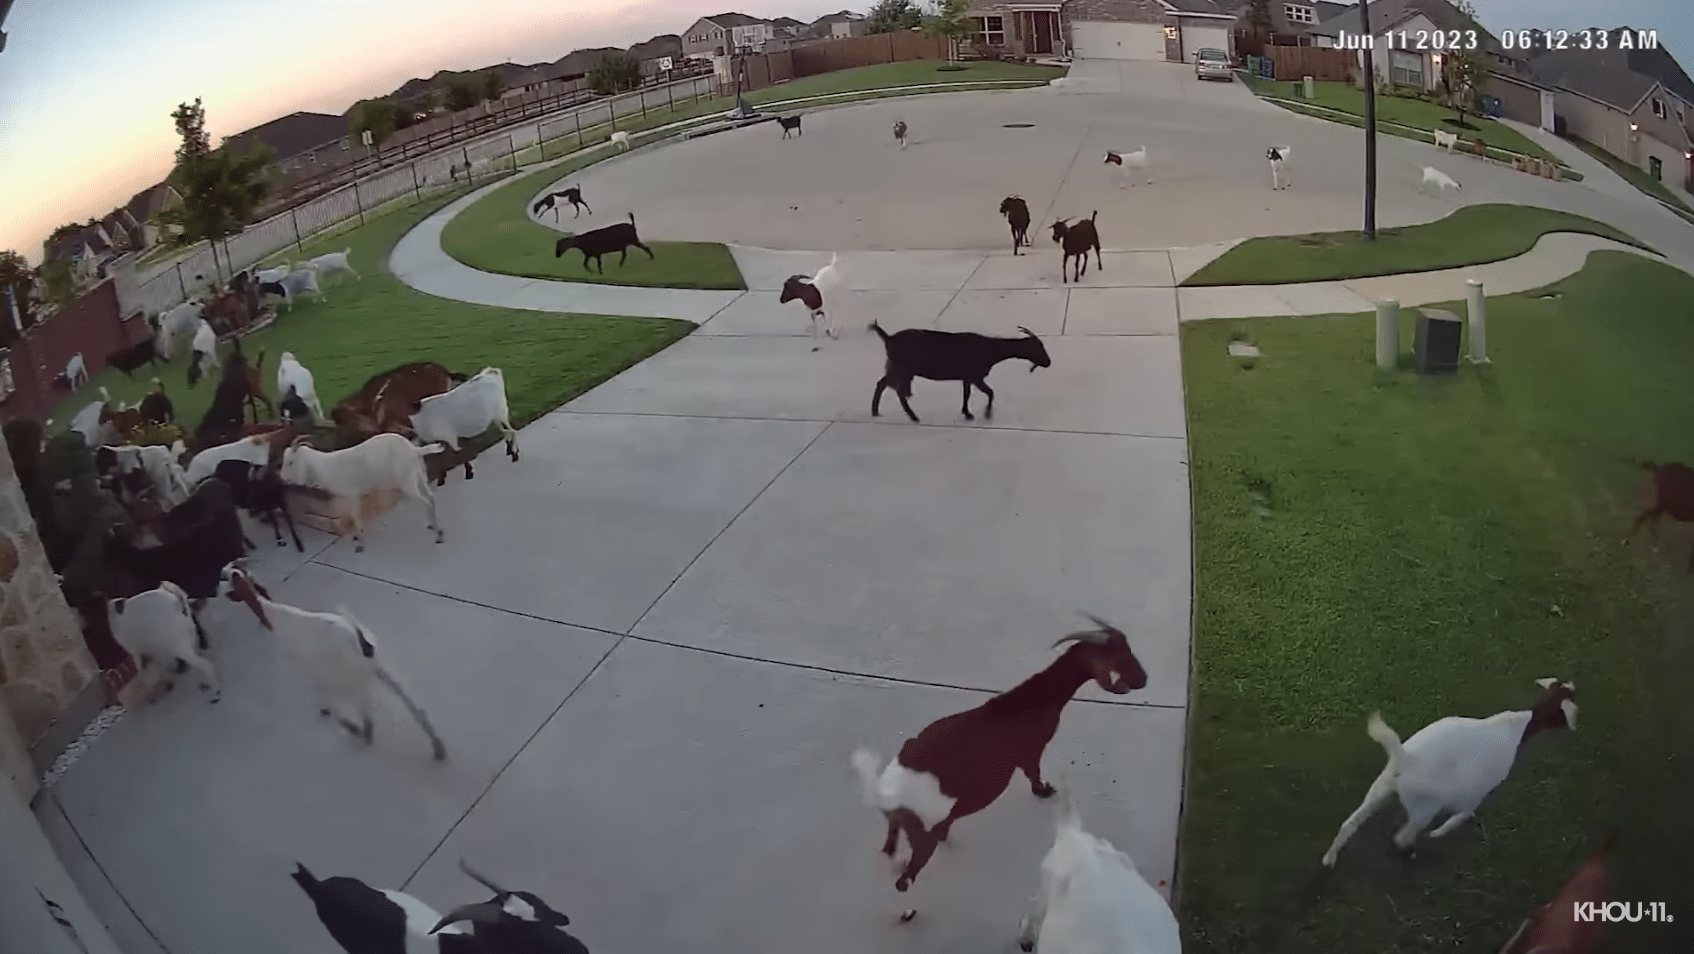 The goats eat the flowers, trees, and vegetation in residents yards.